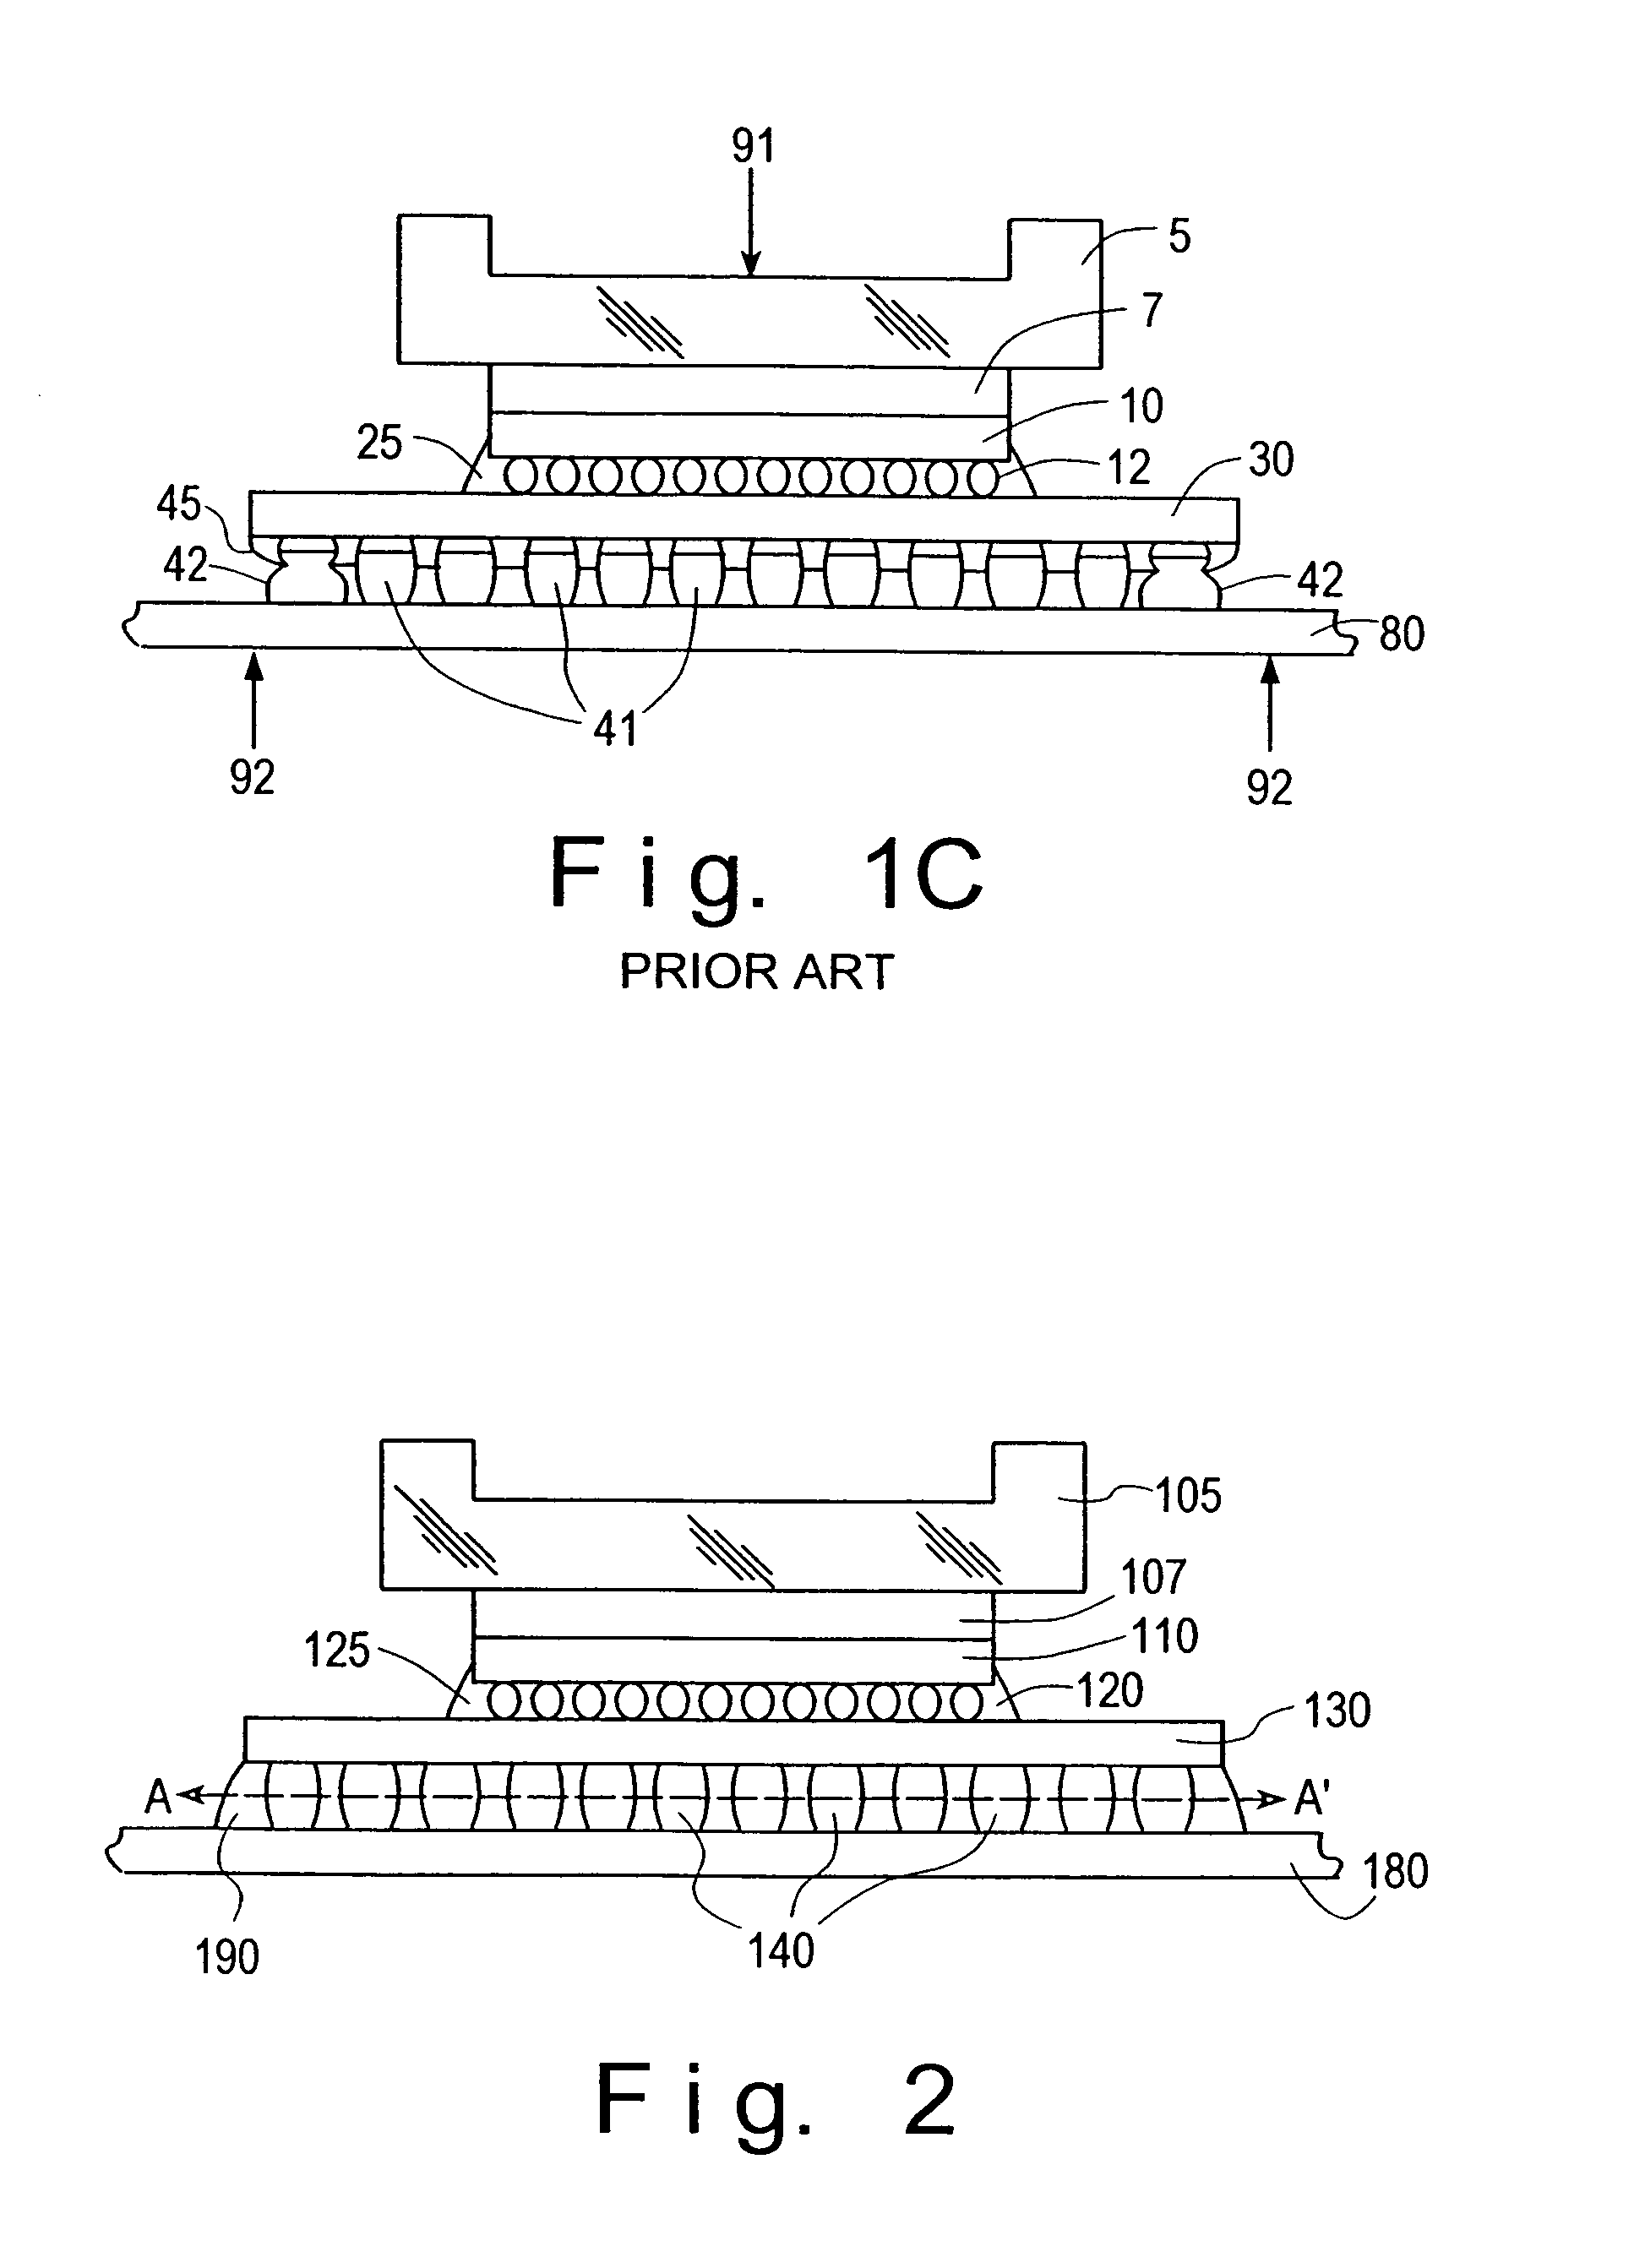 Solder interconnection array with optimal mechanical integrity